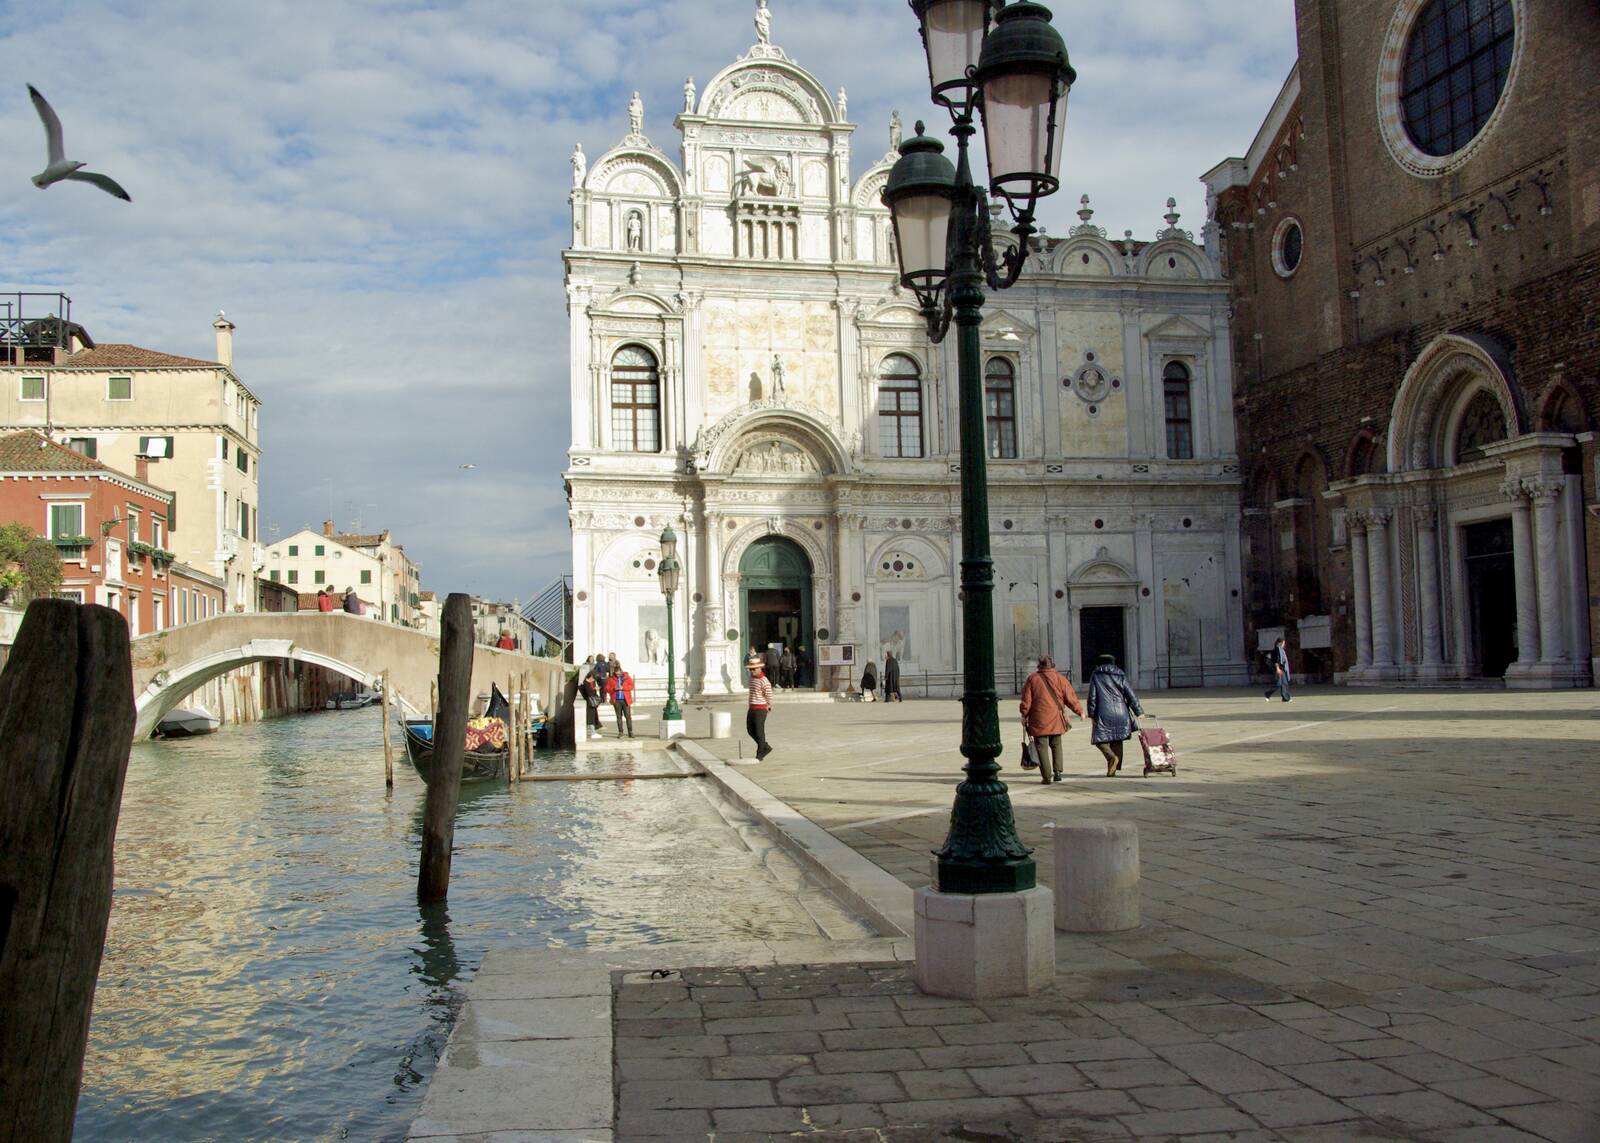 Image of Campo San Giovanni e Paolo by Nigel Shaw